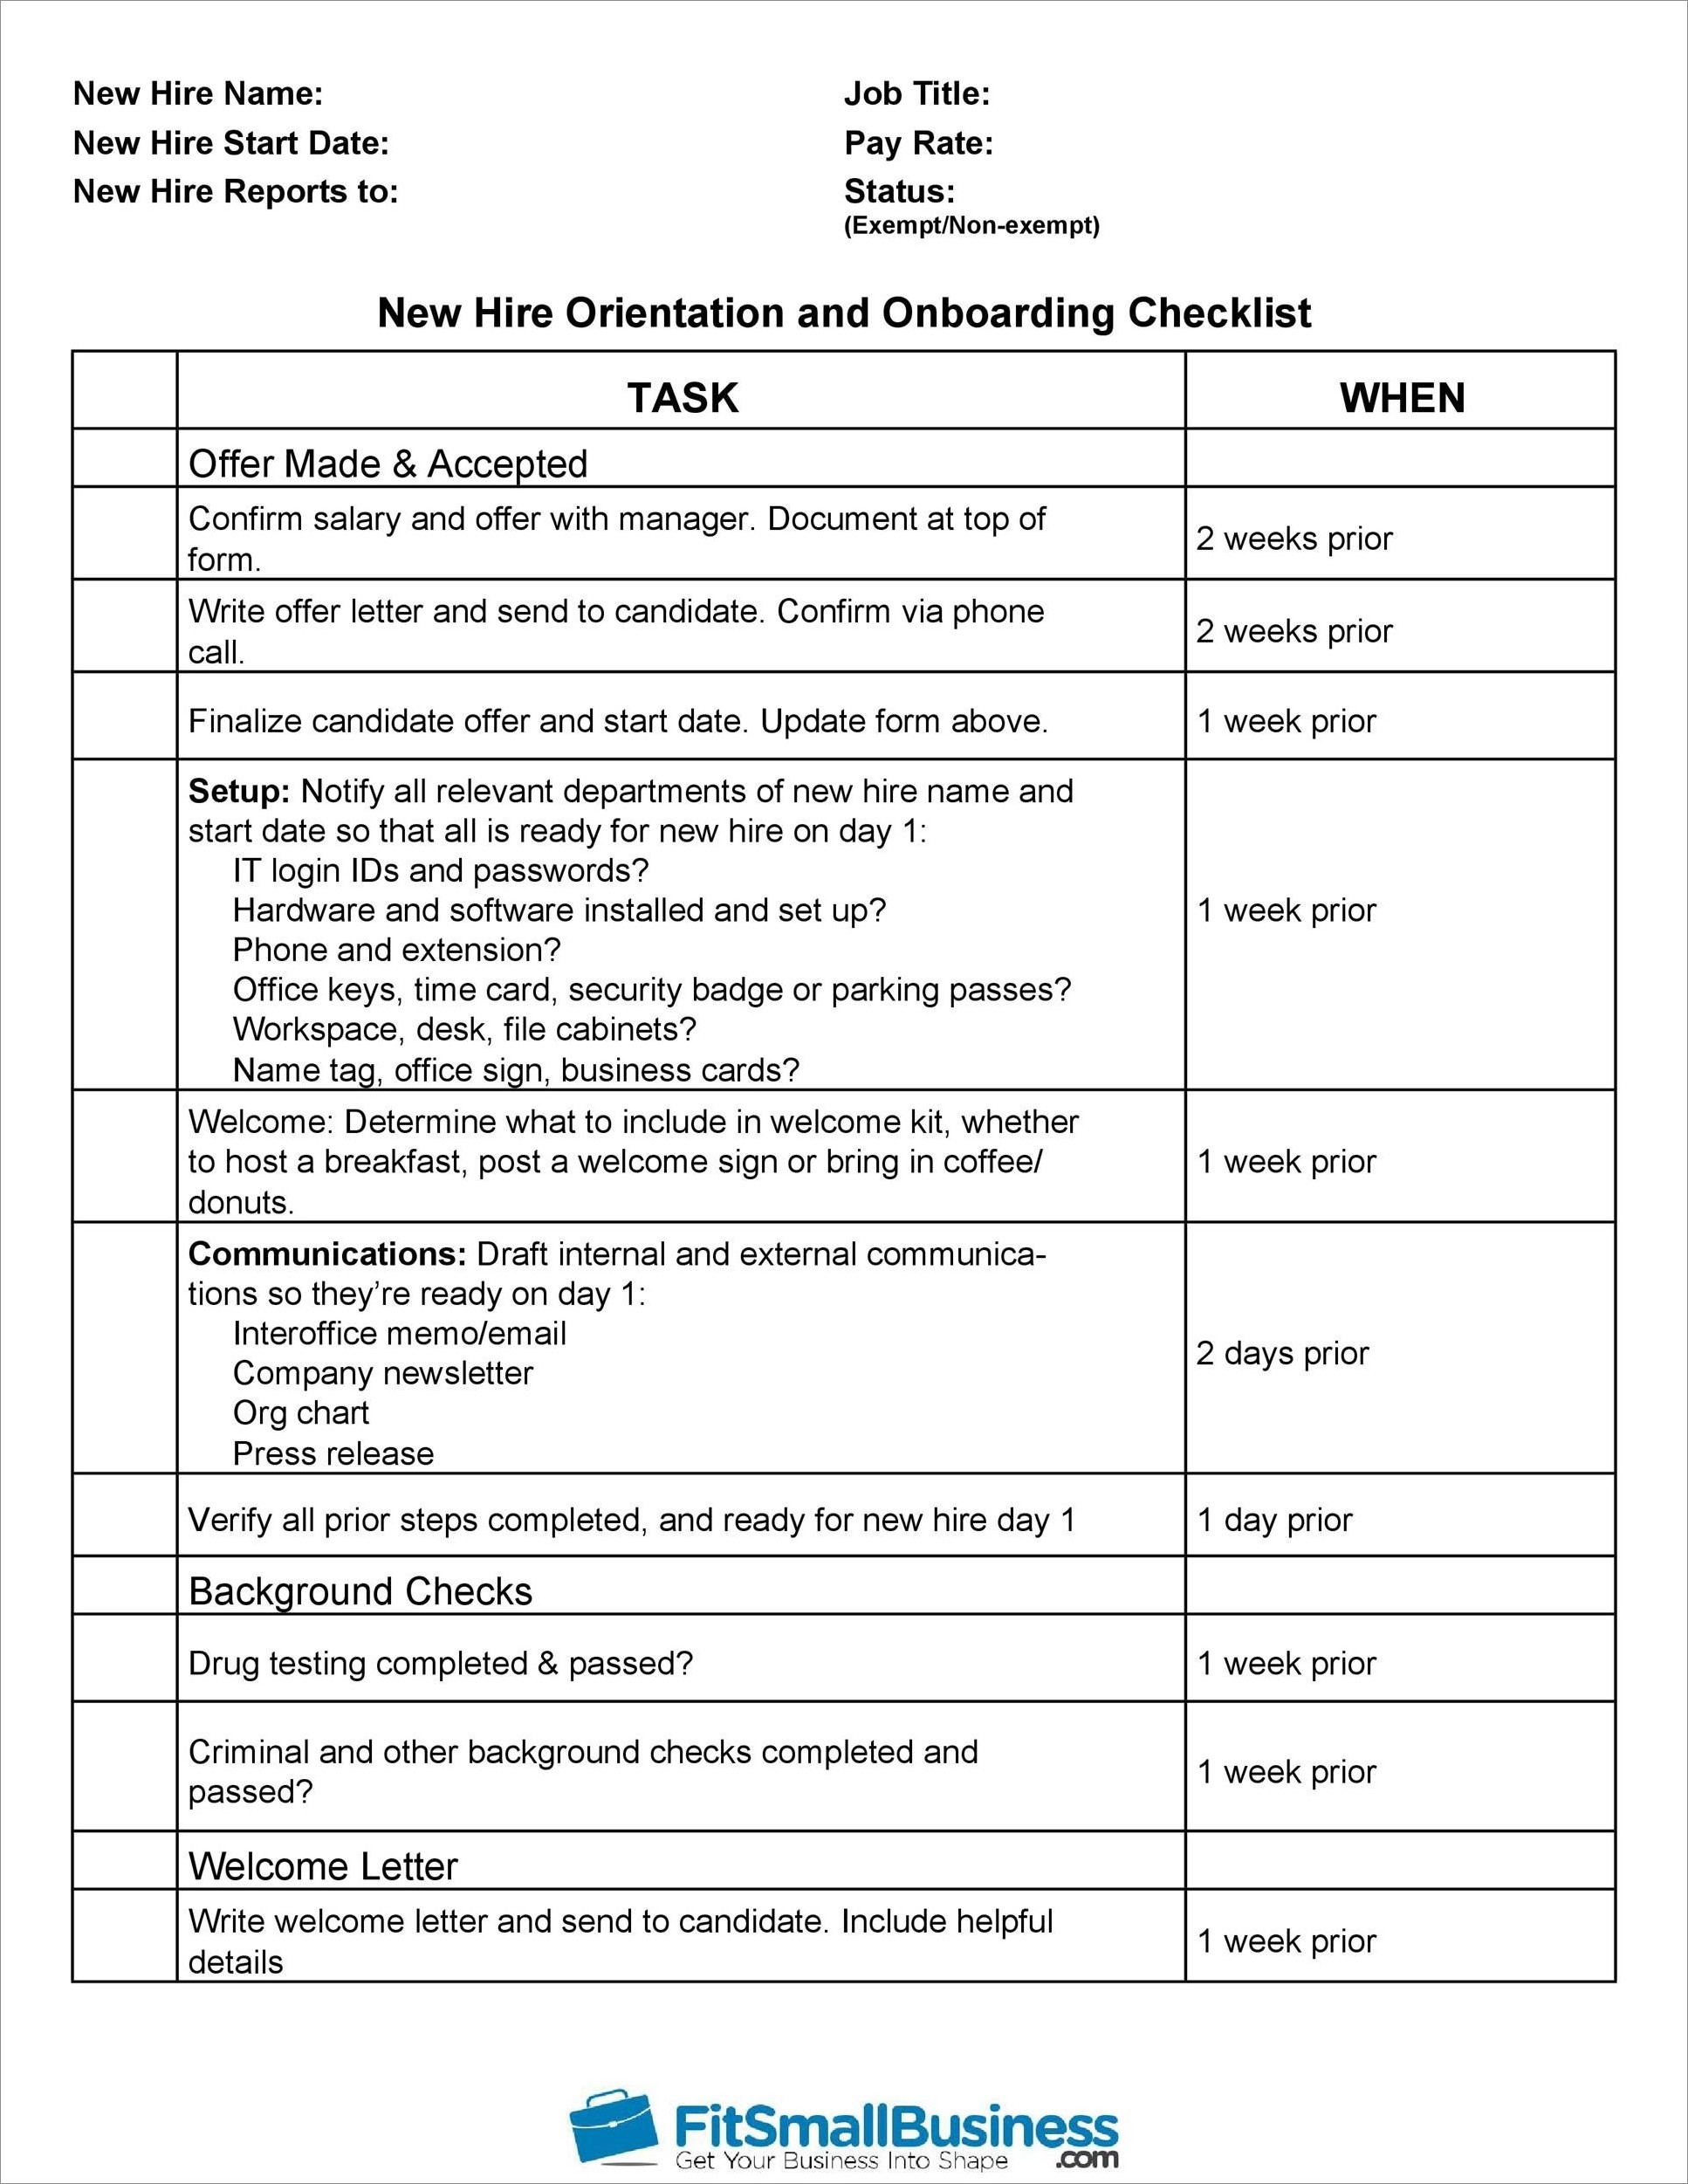 example of new hire checklist template